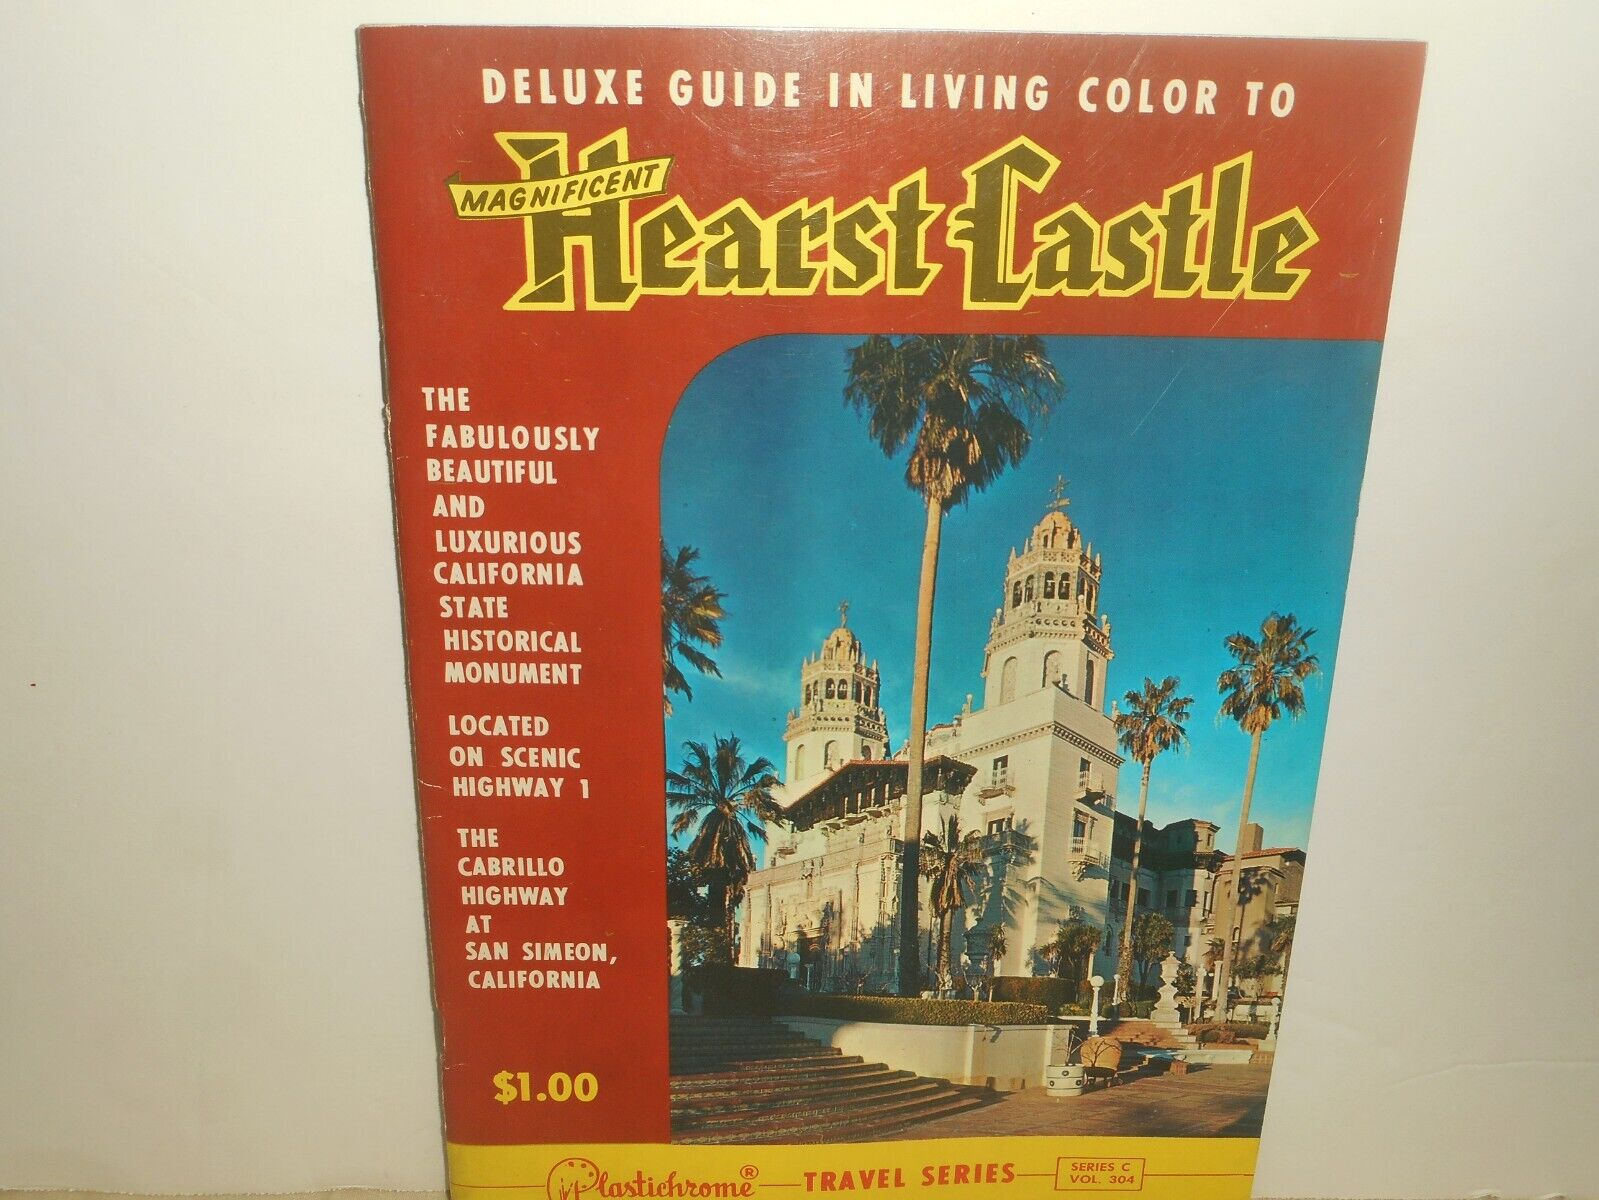 HEARST CASTLE Deluxe Guide in Living Color PLASTICHROME Travel Series Book 1960s